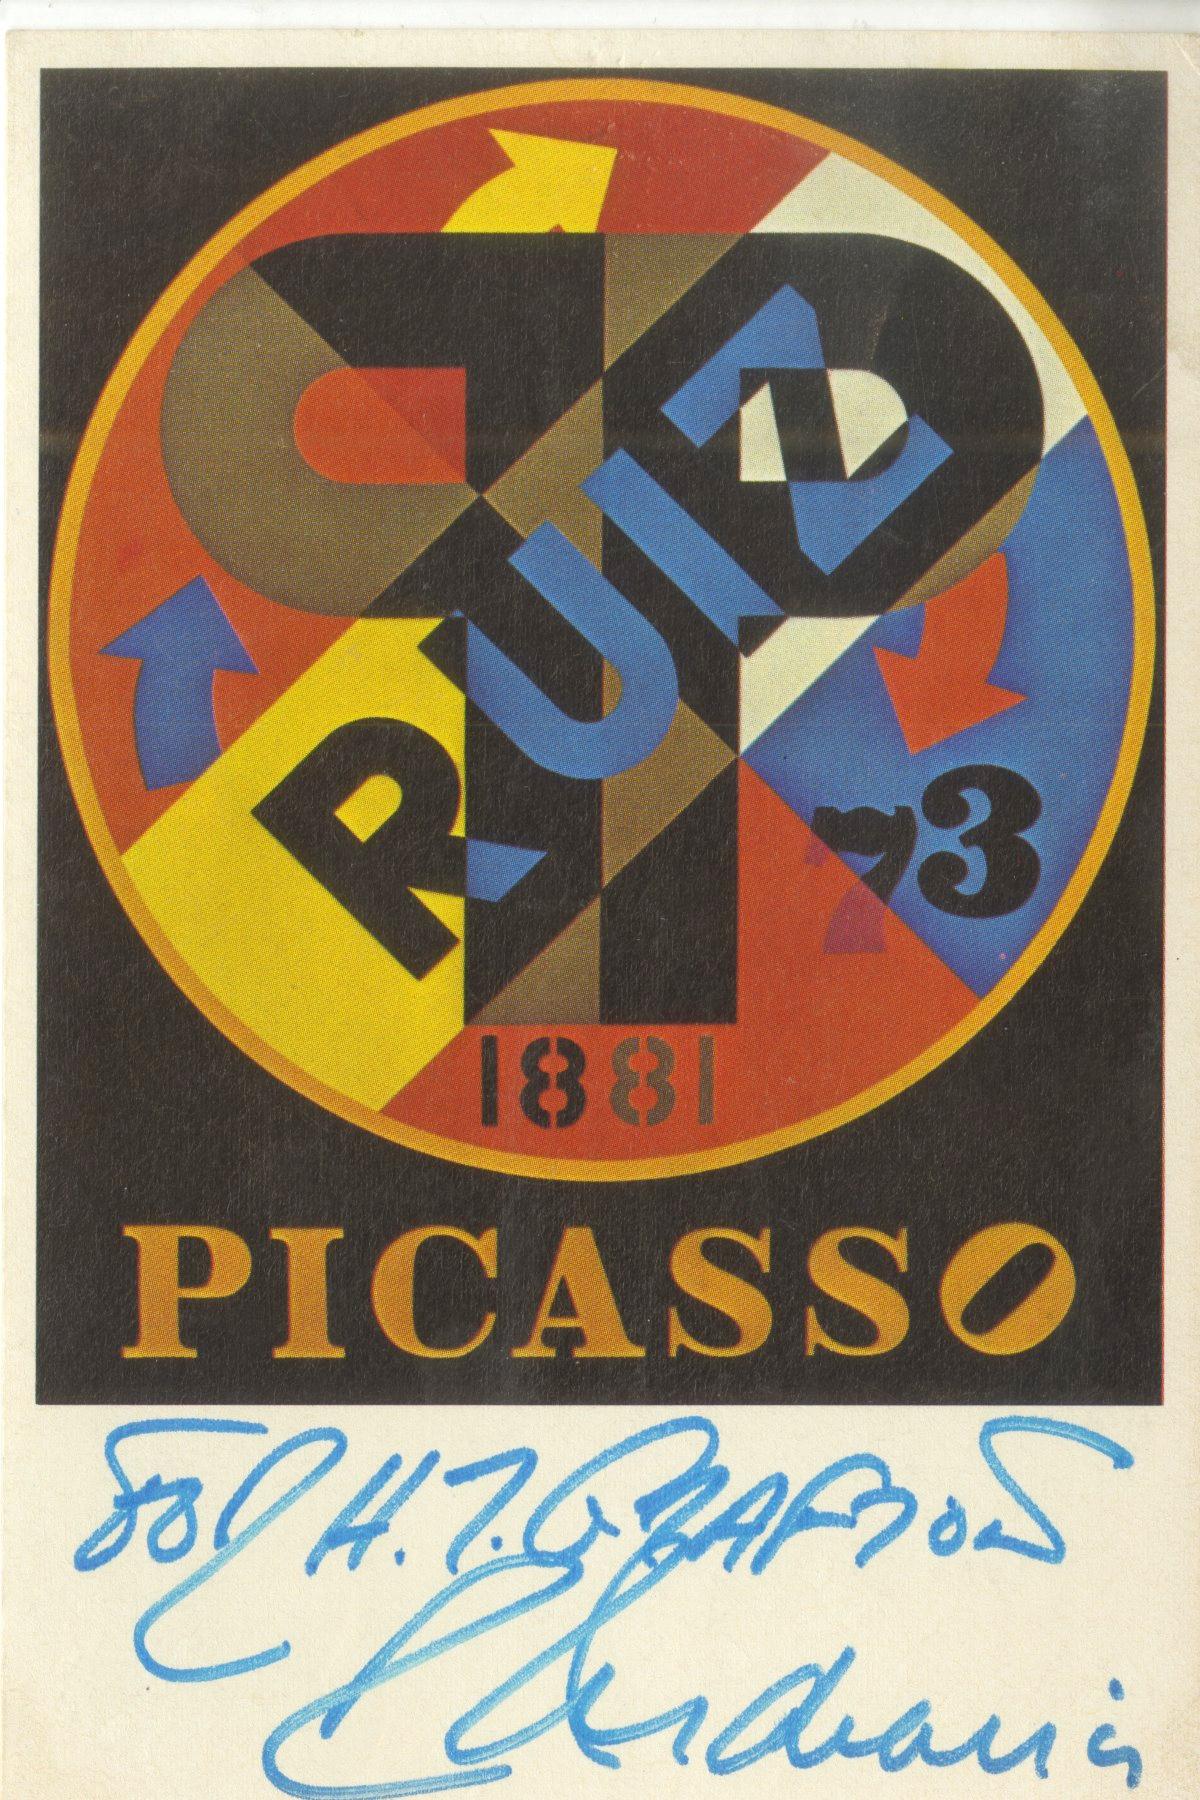 Robert Indiana
Picasso postcard (Hand Signed and Inscribed), 1979
Vintage Picasso postcard
Boldly signed and inscribed on the front by Robert Indiana
6 × 4 inches
Unframed
This vintage postcard of Robert Indiana's iconic 1974 PICASSO painting boldly